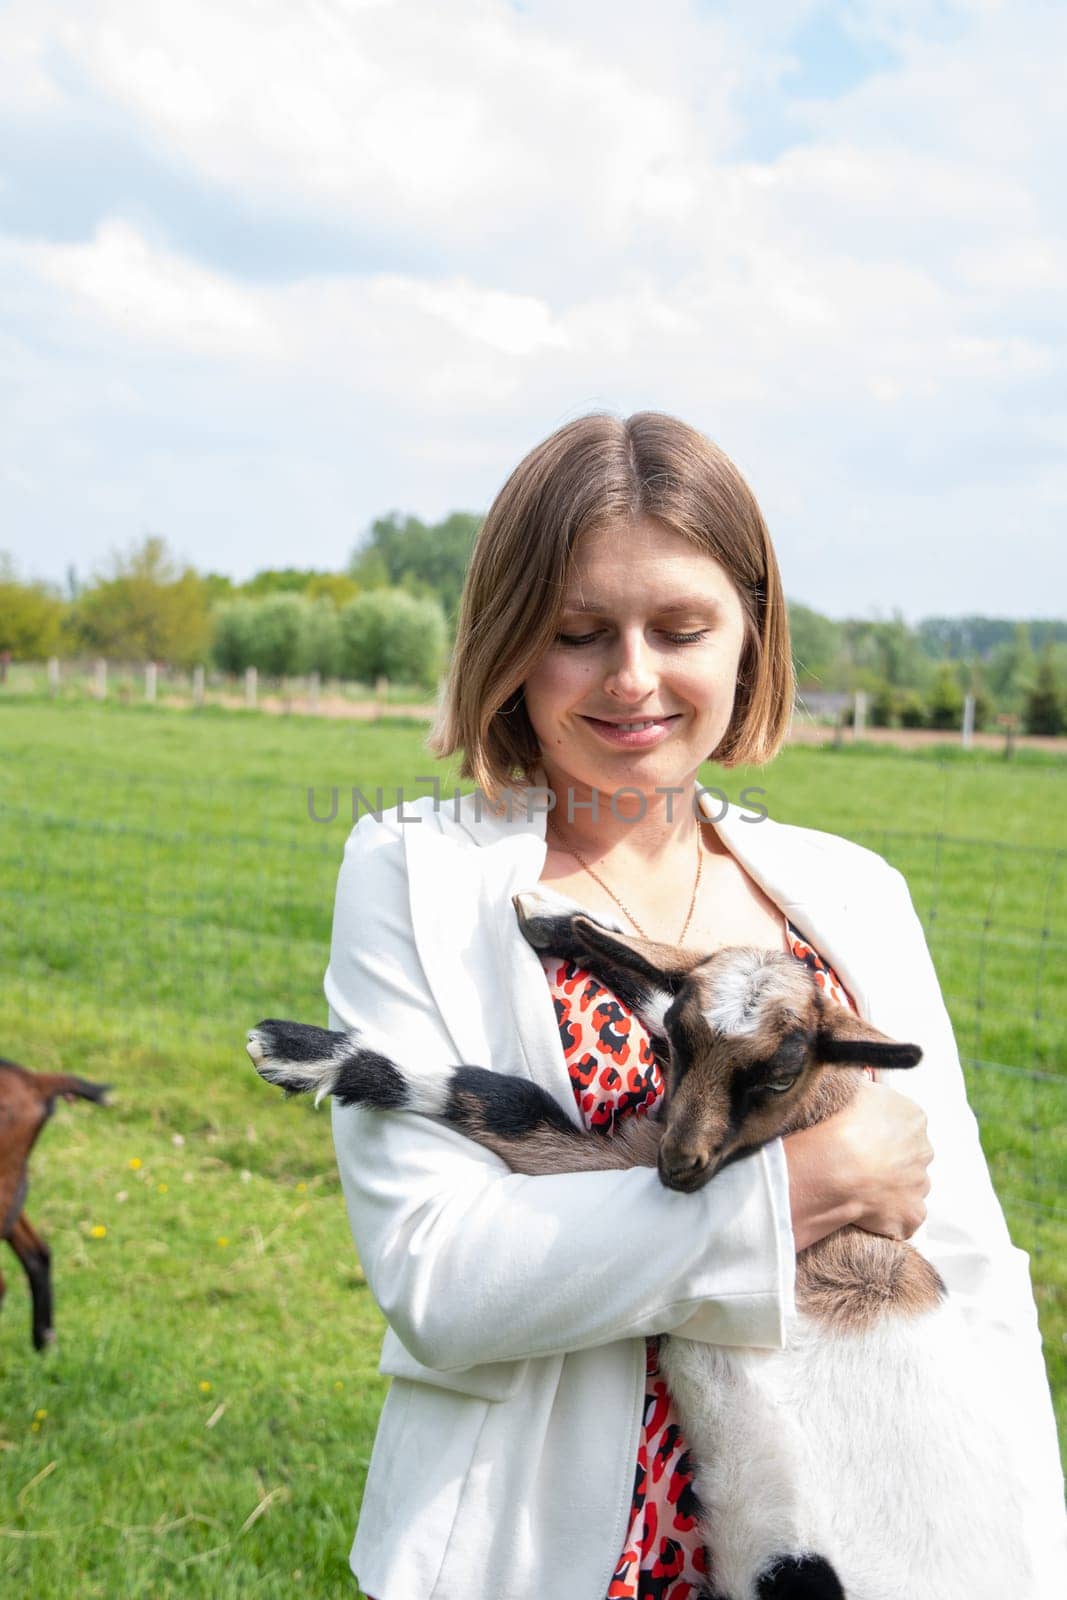 Young woman plays with goat kids, feeding them, sun shining over farm in background, High quality photo